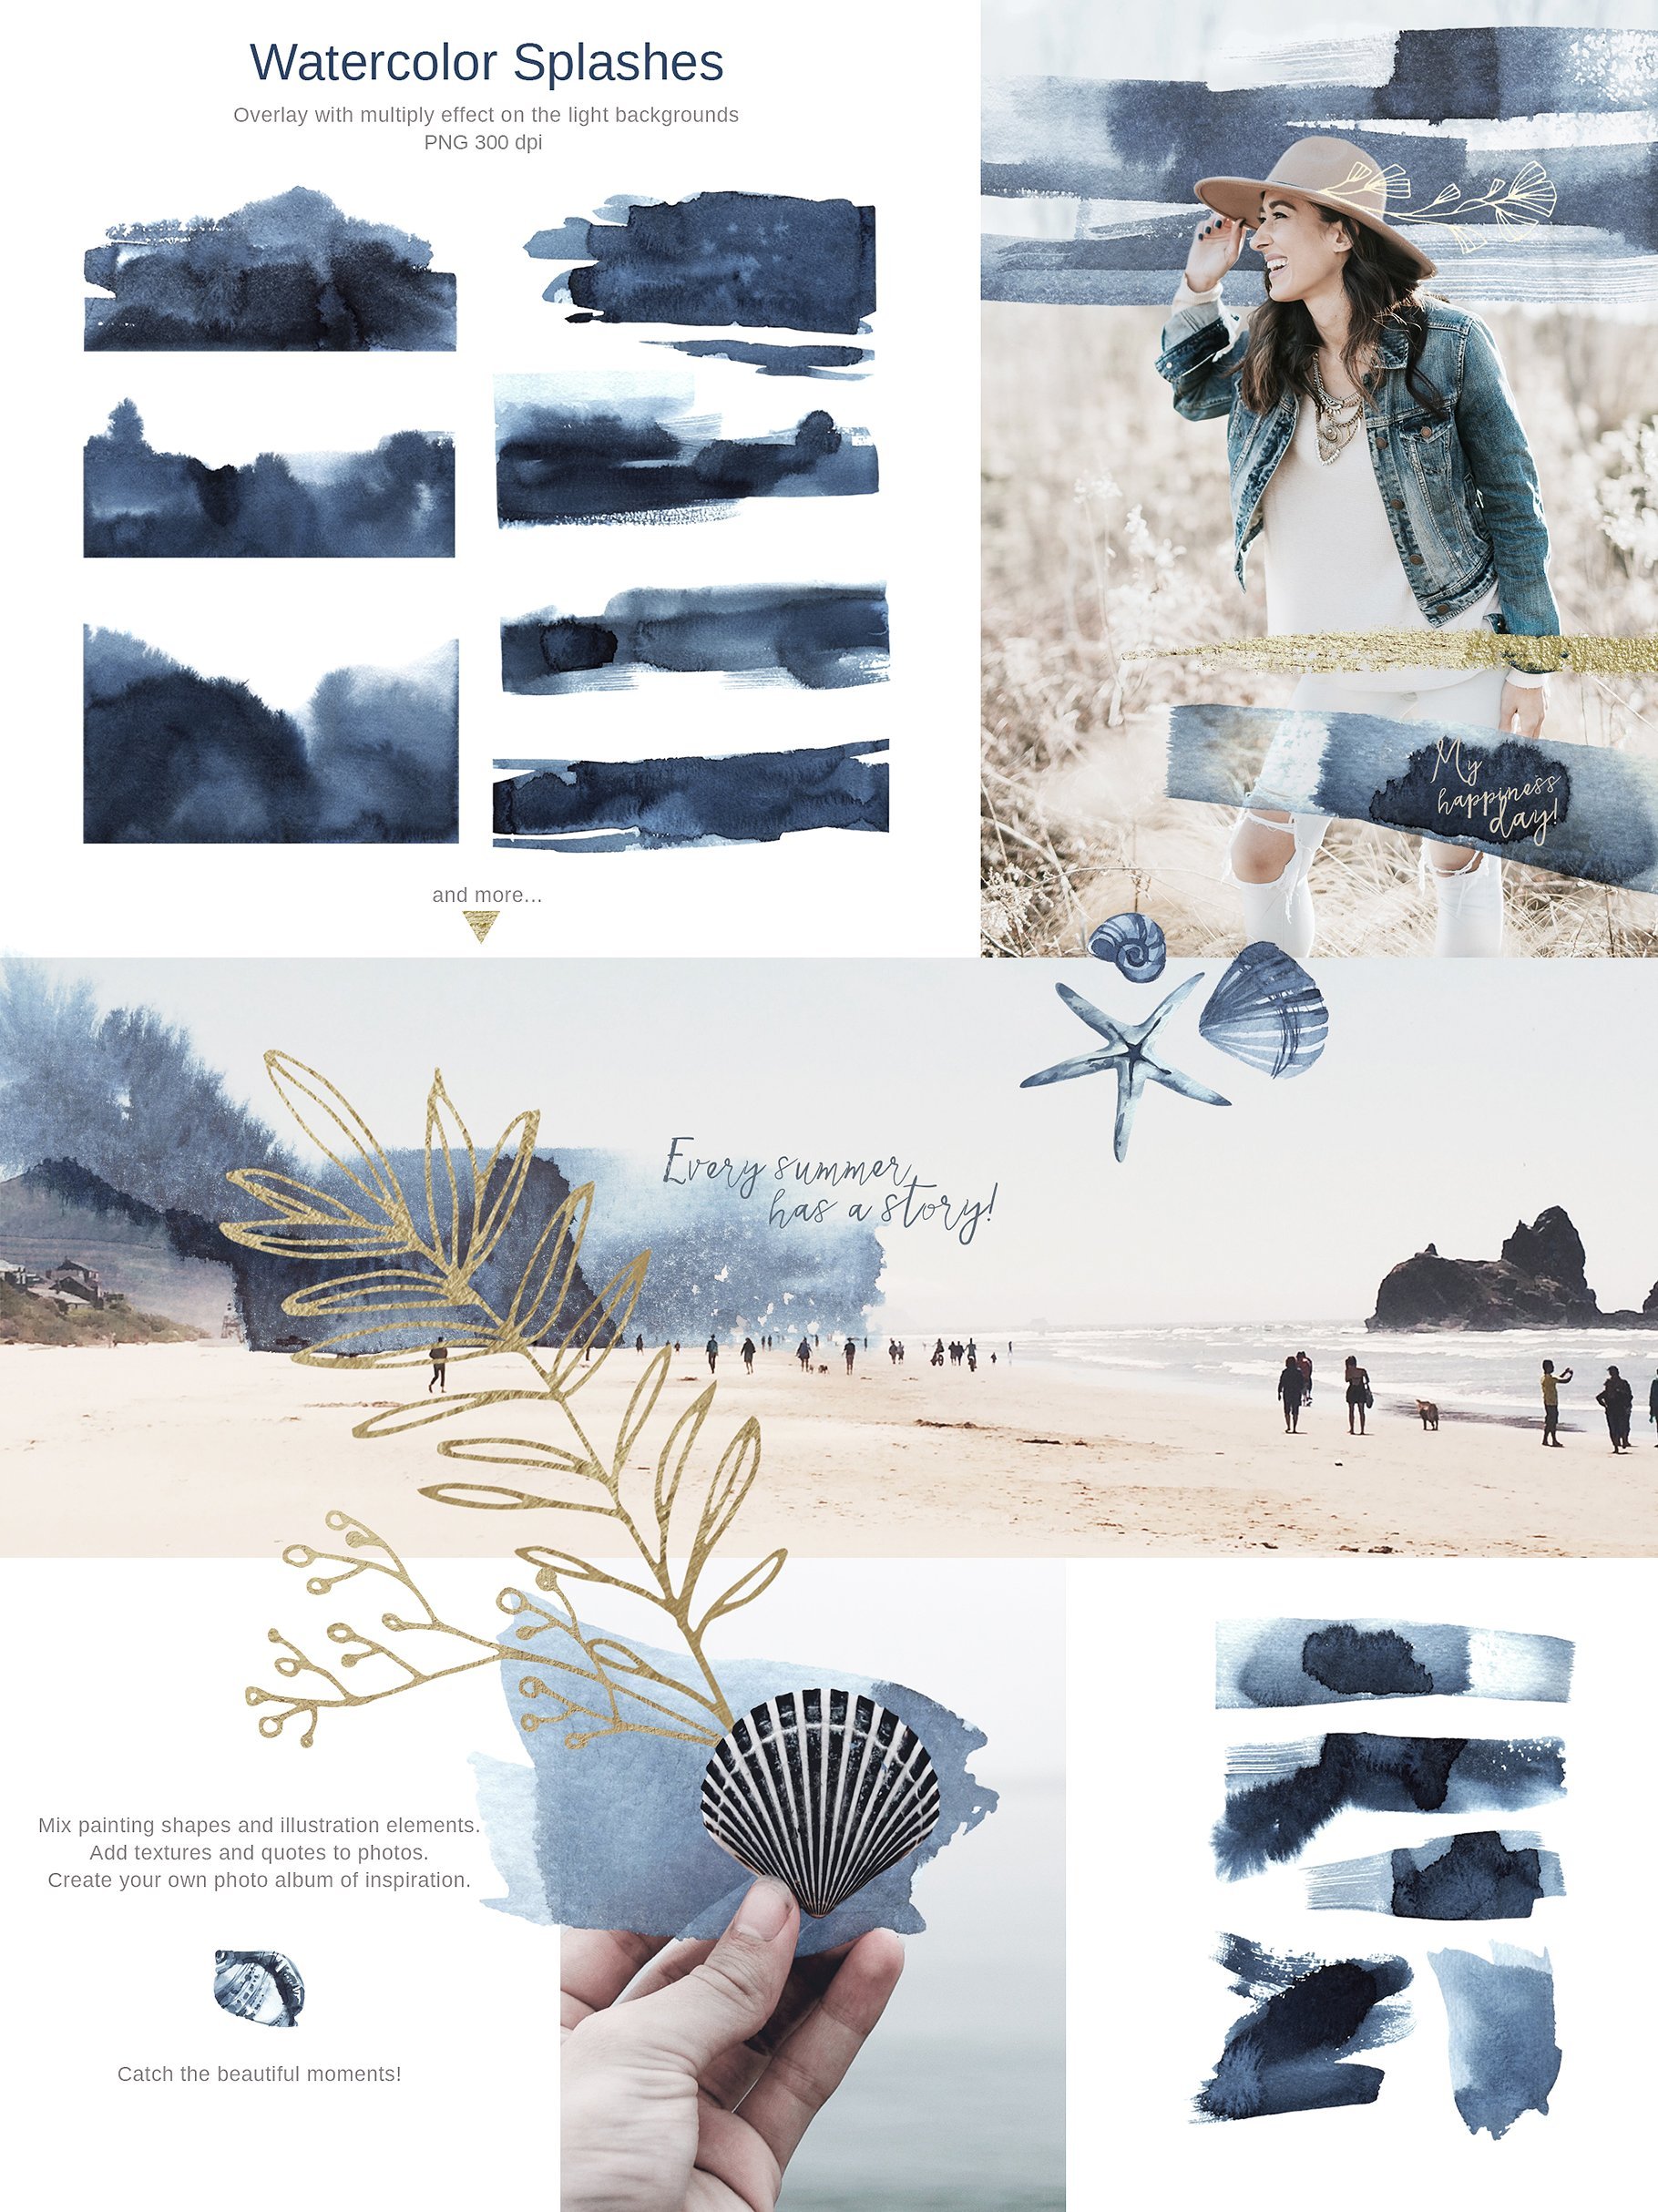 Watercolor Sapphire Textures & Illustrations